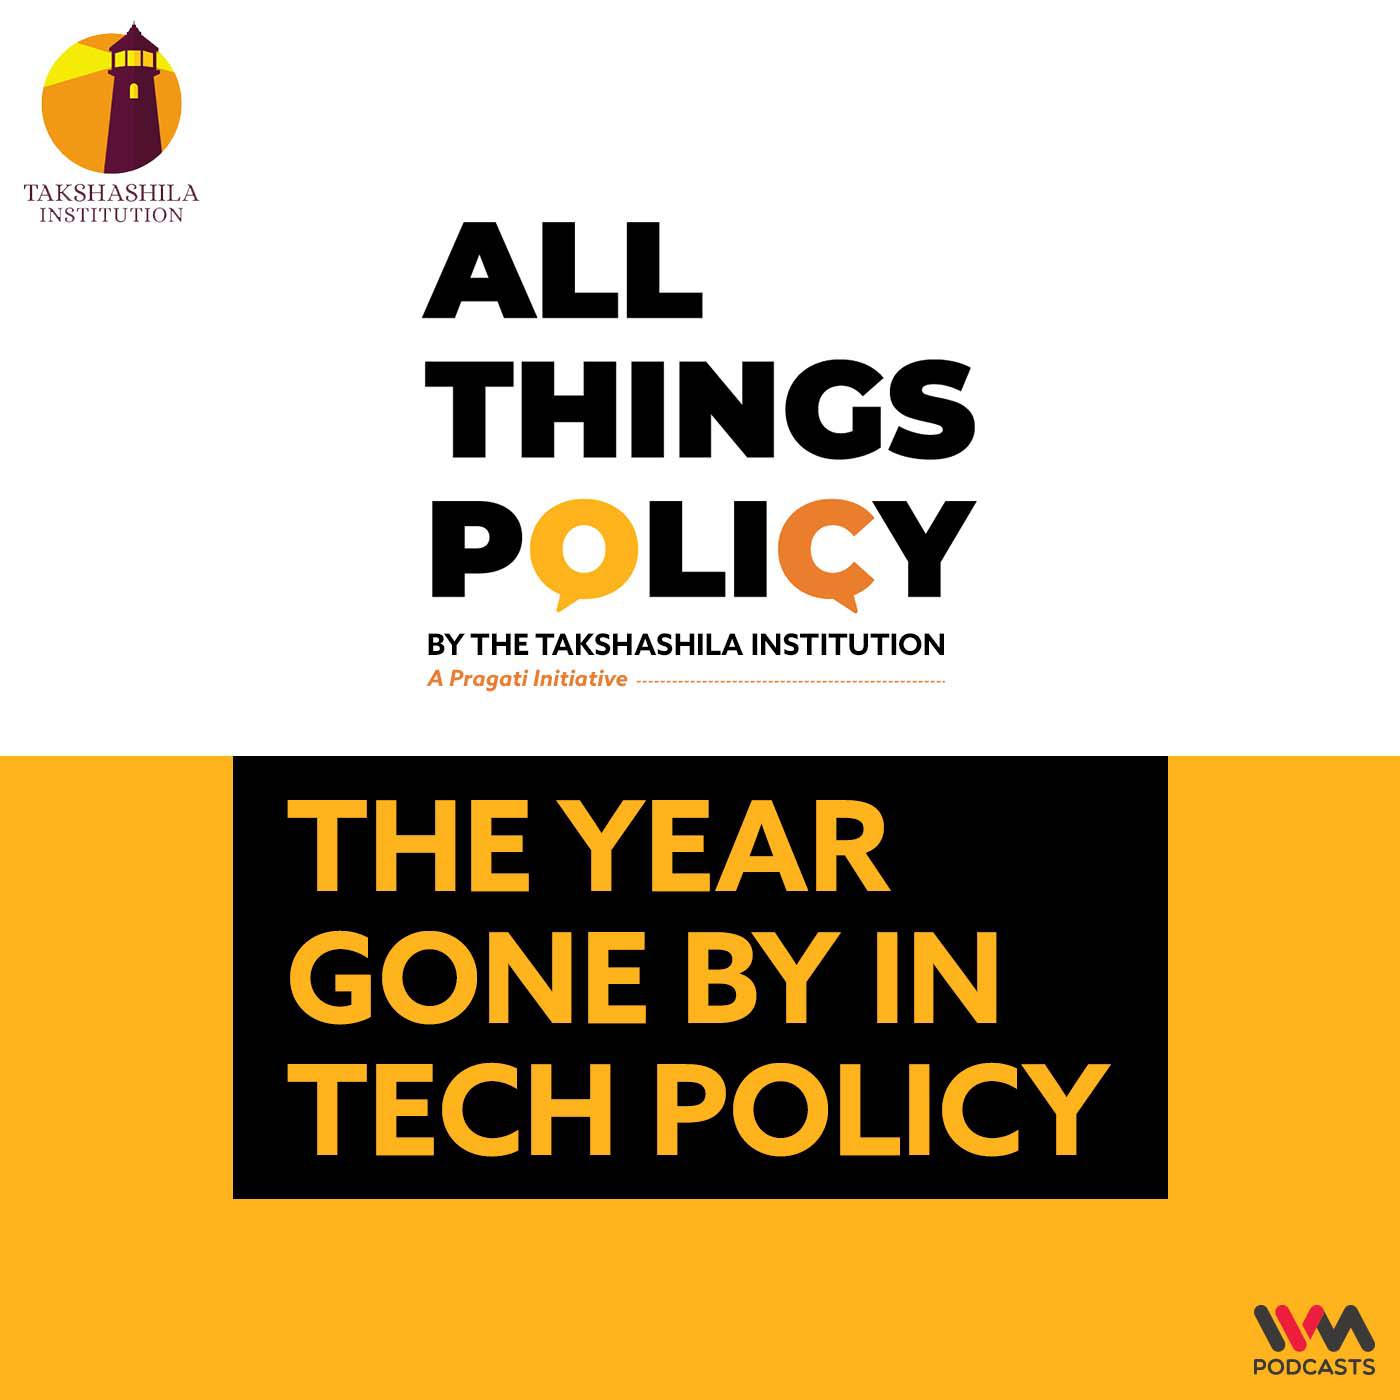 The Year Gone By In Tech Policy